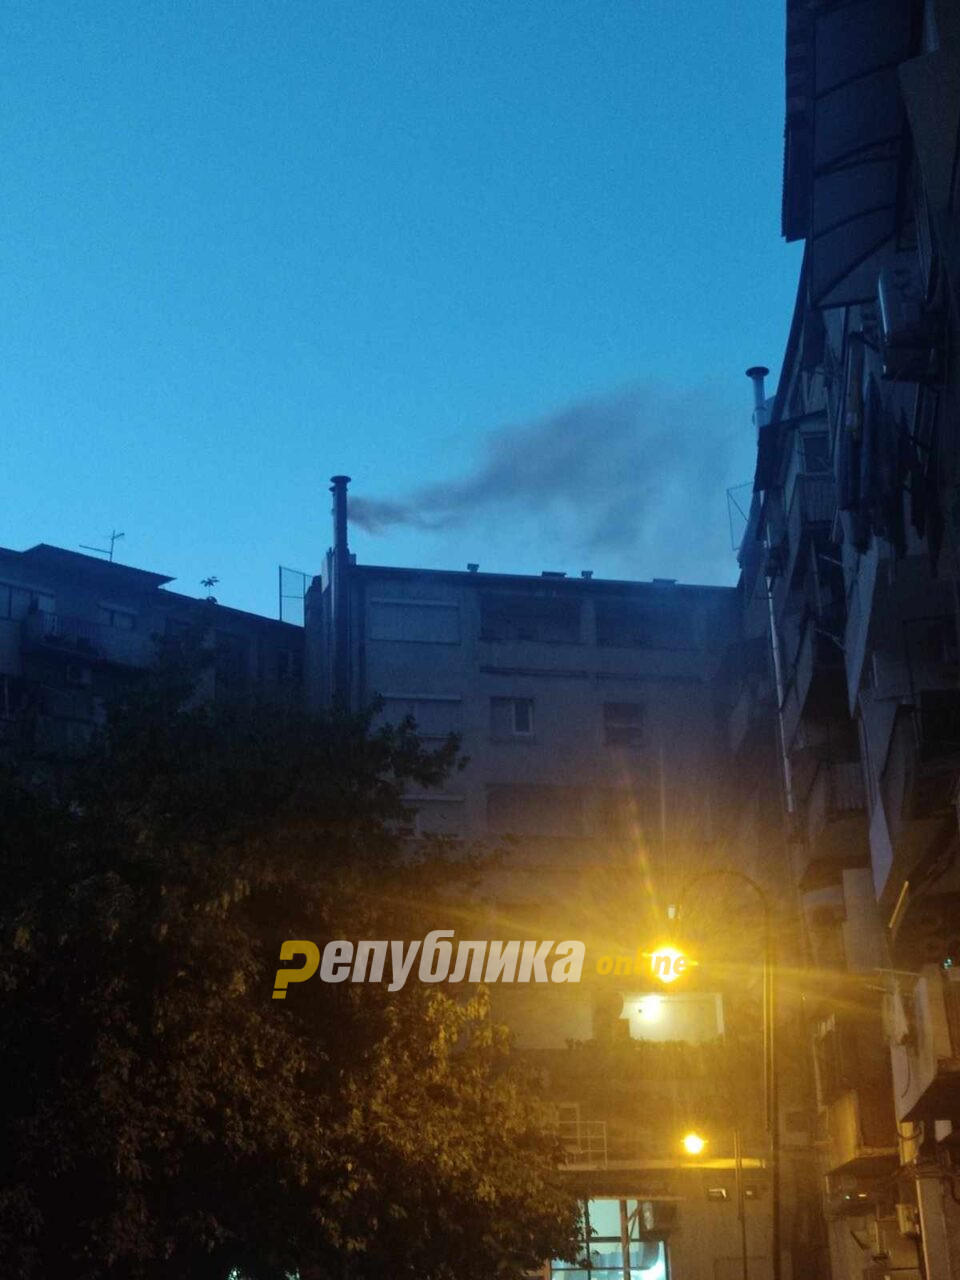 Downtown Skopje under smoke because of a faulty restaurant chimney